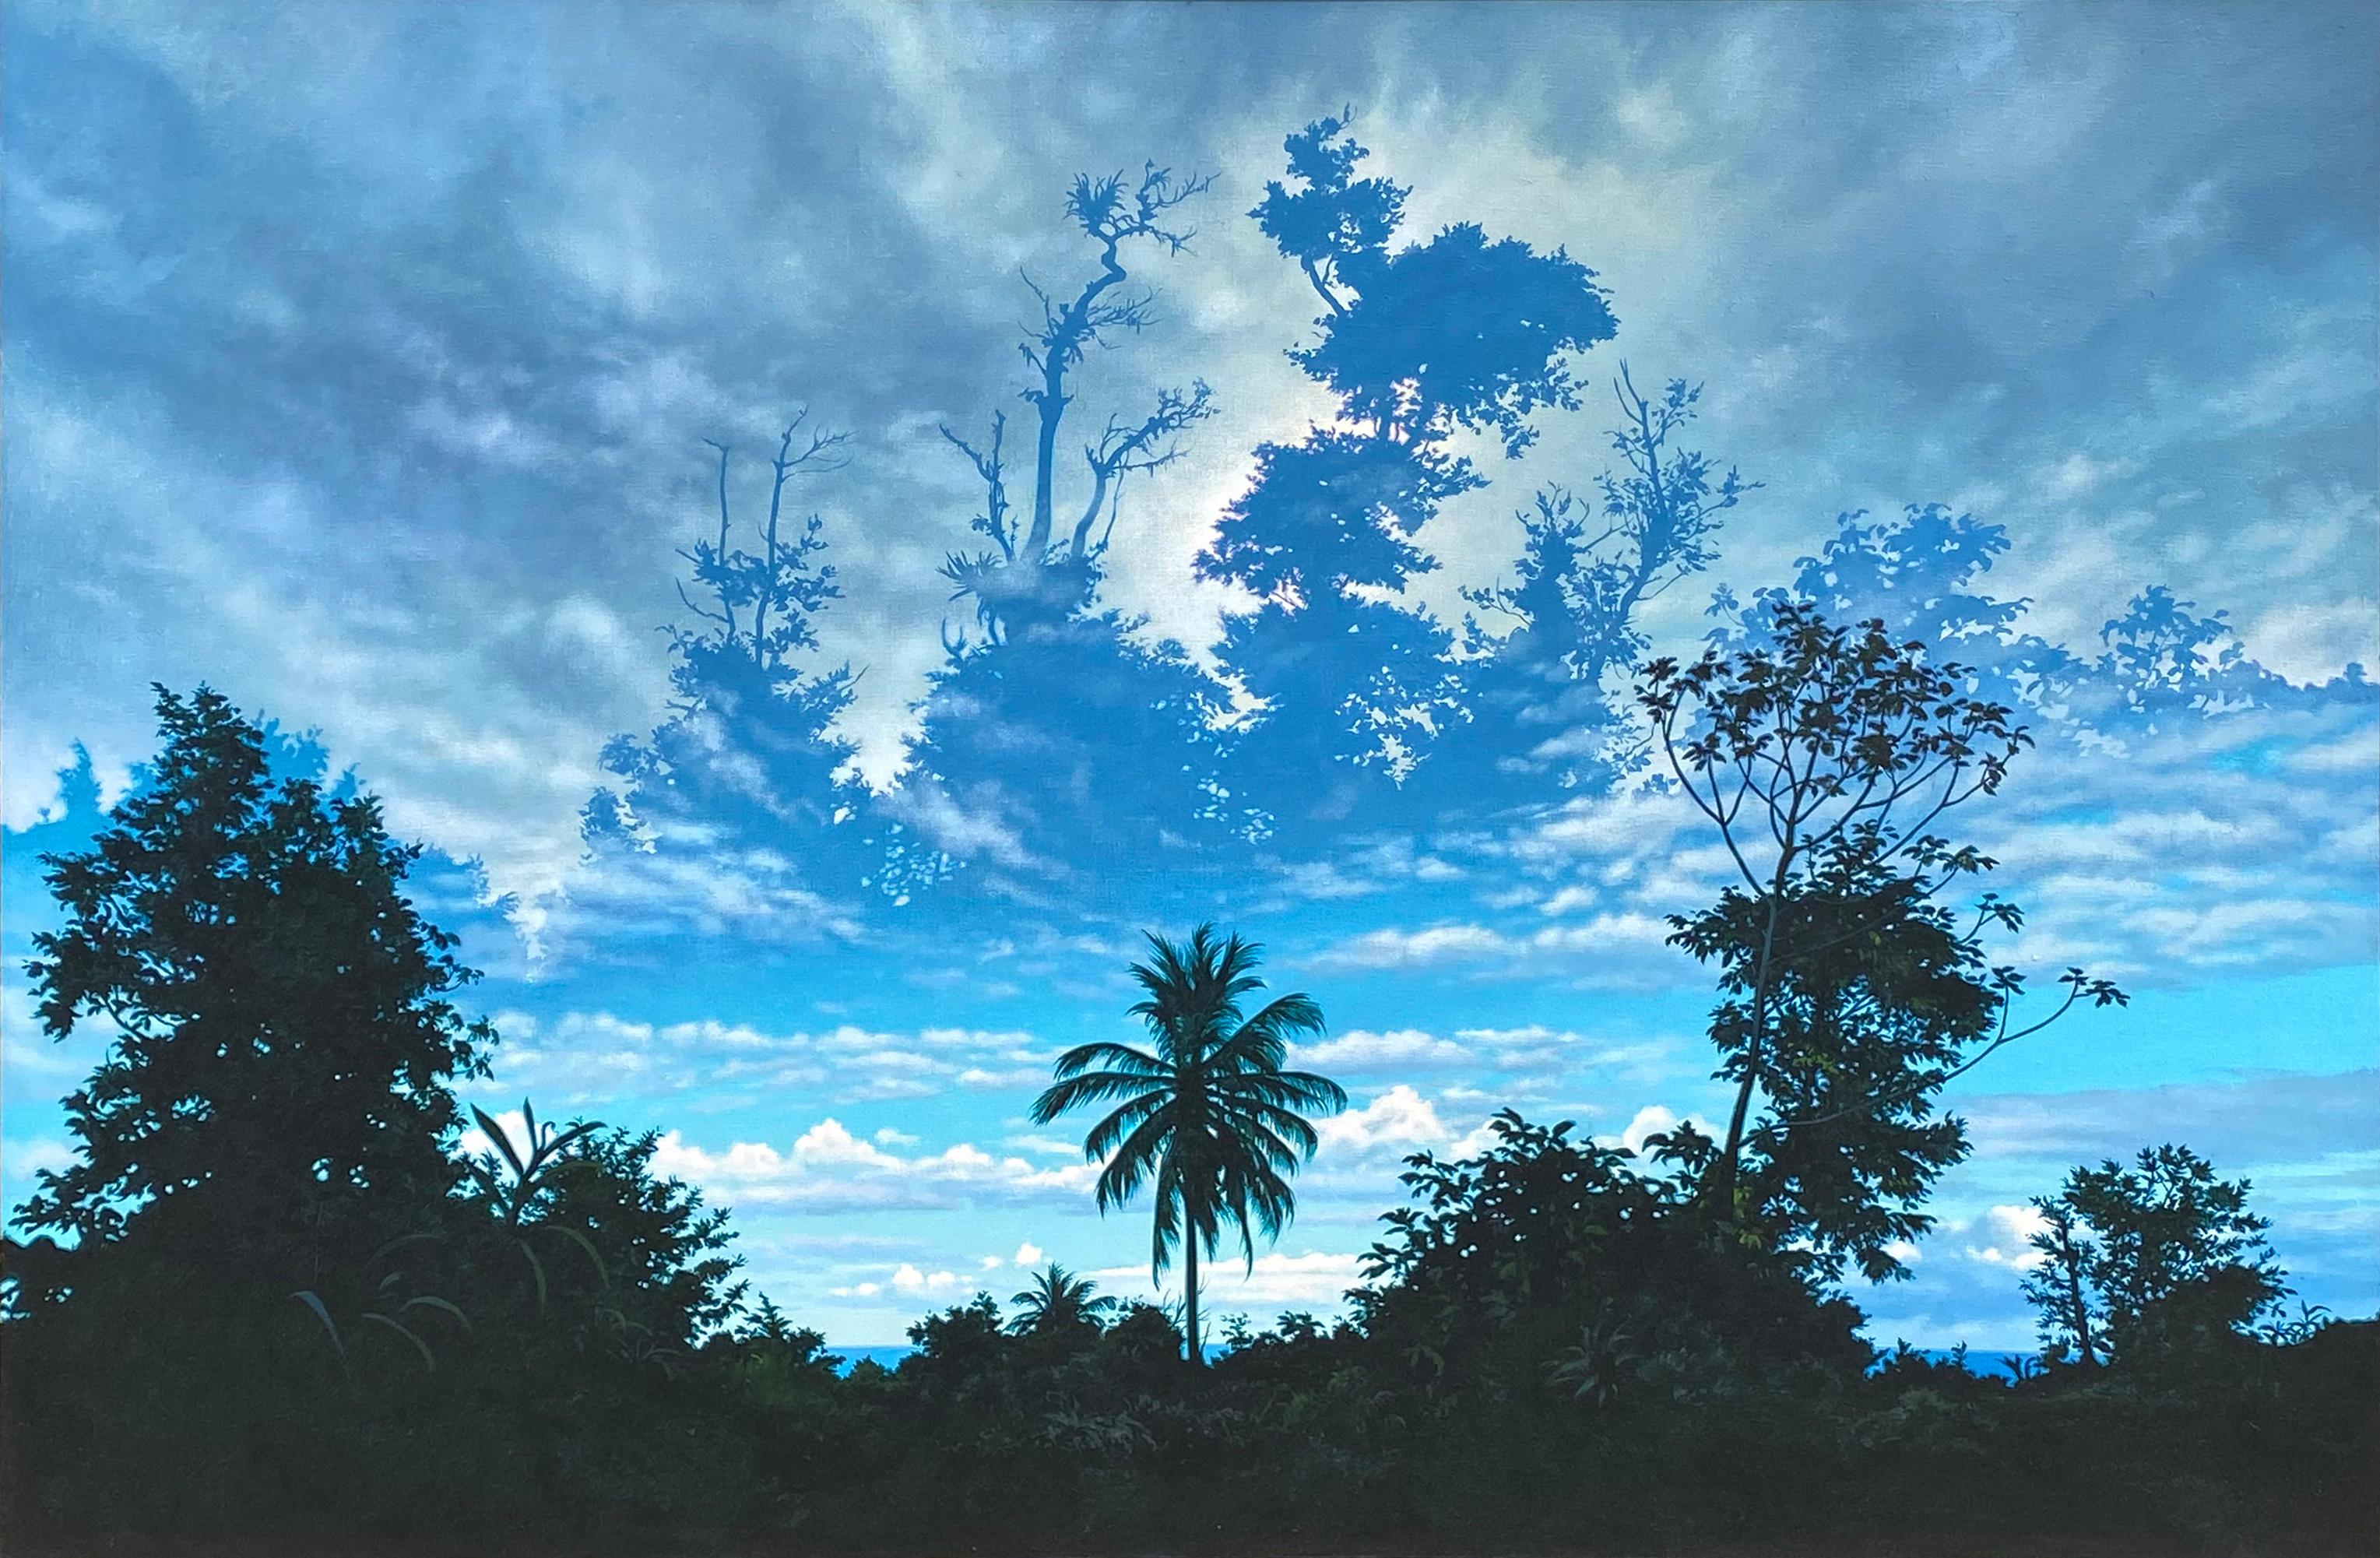 American Photorealist Ian Hornak’s stunning depiction of a tropical landscape is framed by back-lit palm trees and clouds illuminated with the setting sun. The painting is signed, titled and dated on the verso. Provenance: Gertrude Kasle Gallery